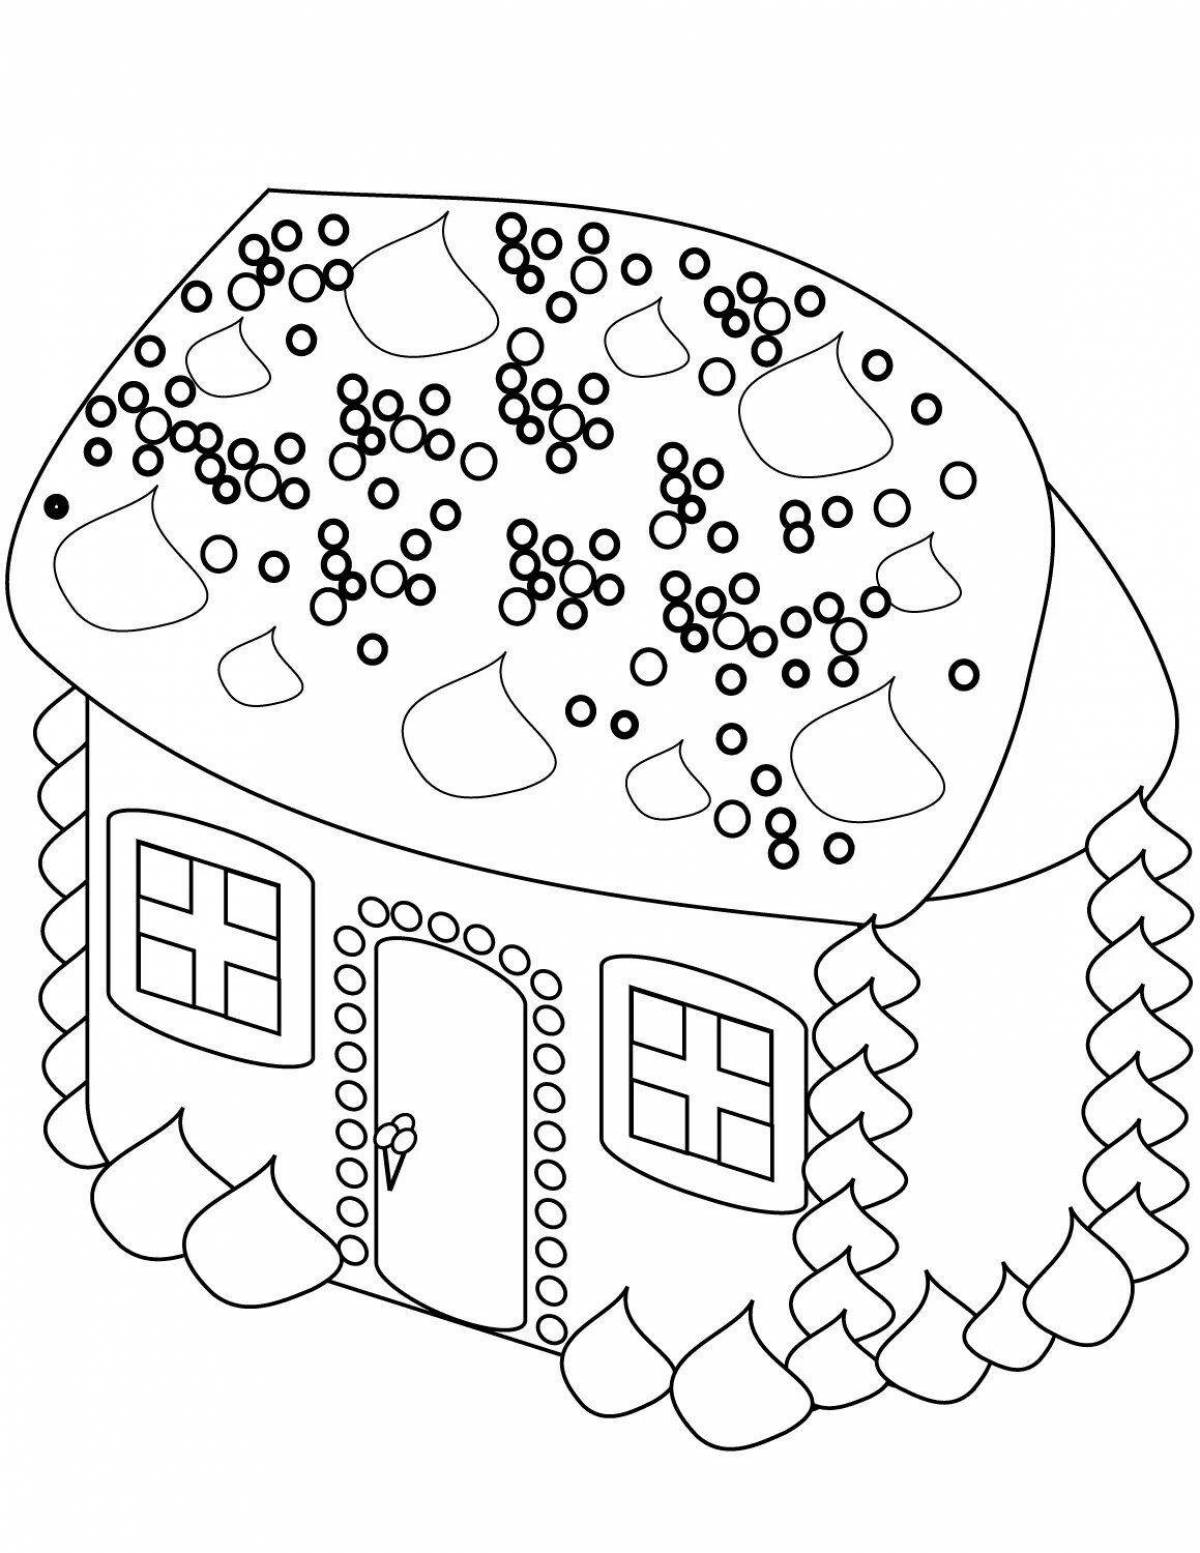 Exquisite Christmas gingerbread house coloring book